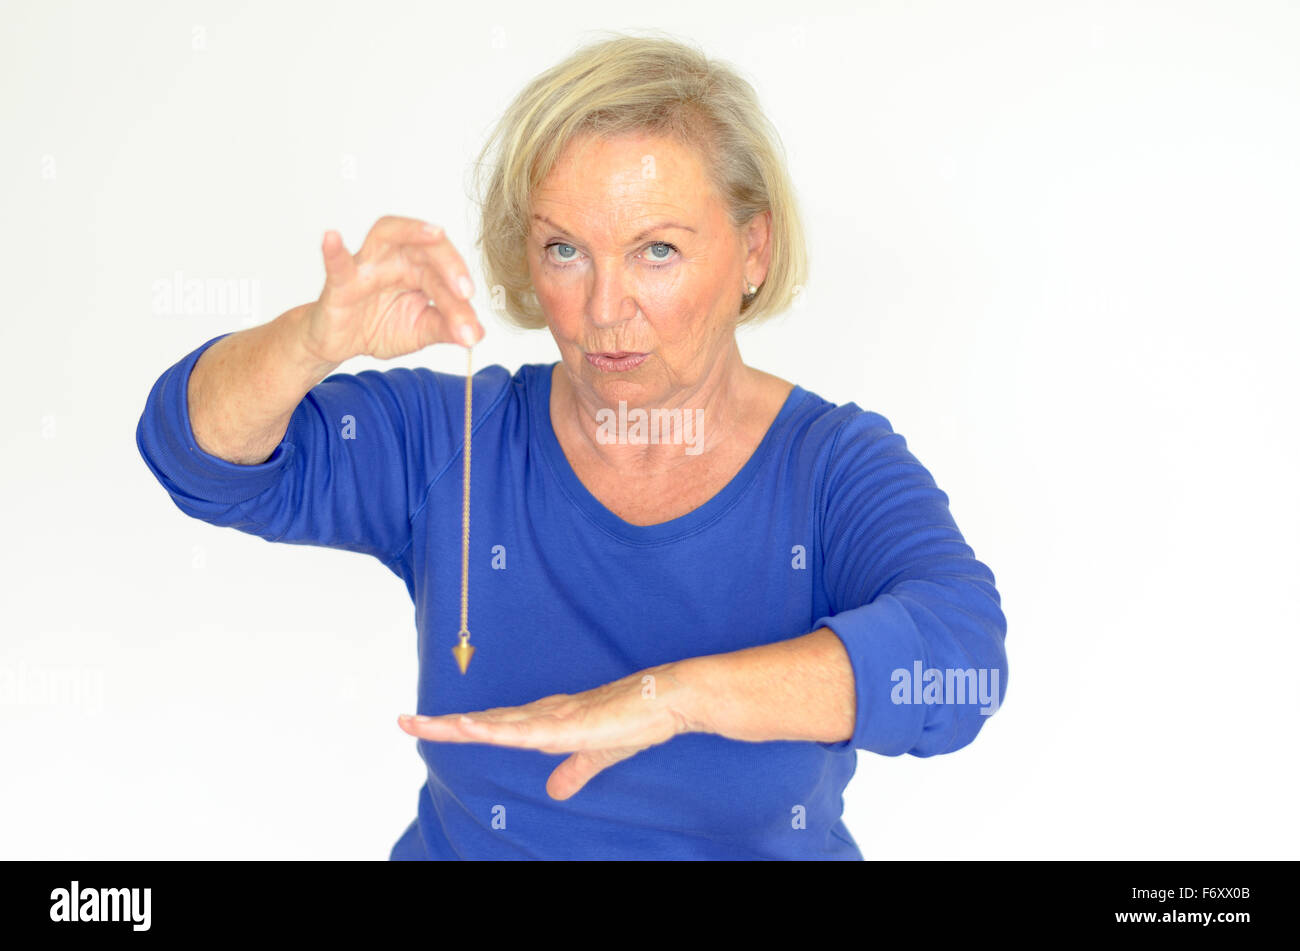 Attractive blond elderly woman holding a pendulum over her hand in a fortune telling, divination or hypnosis concept Stock Photo